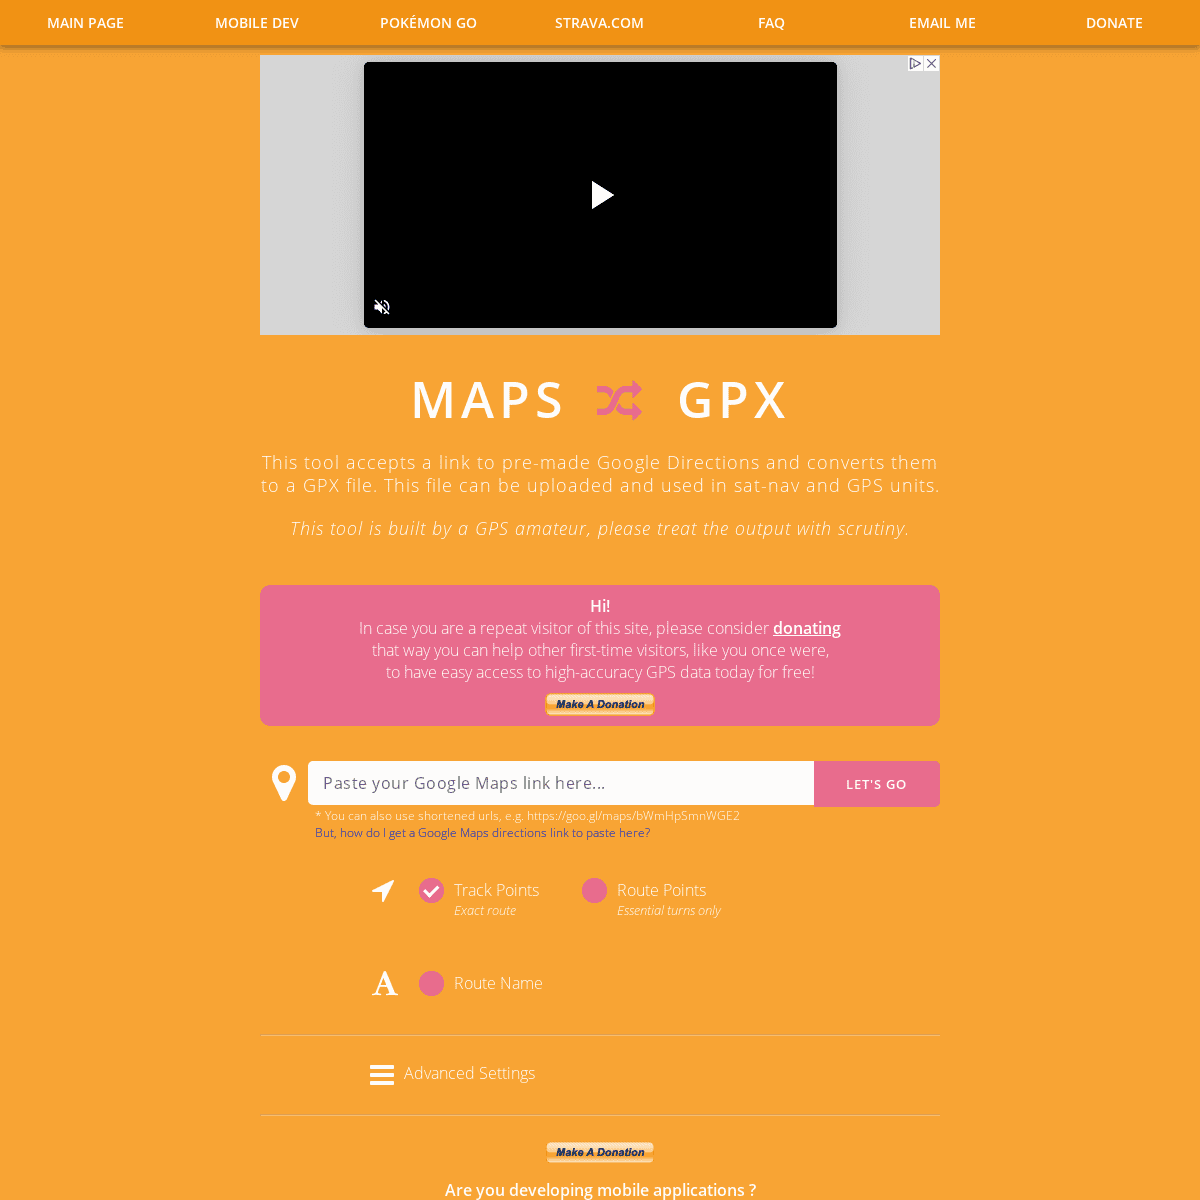 A complete backup of mapstogpx.com